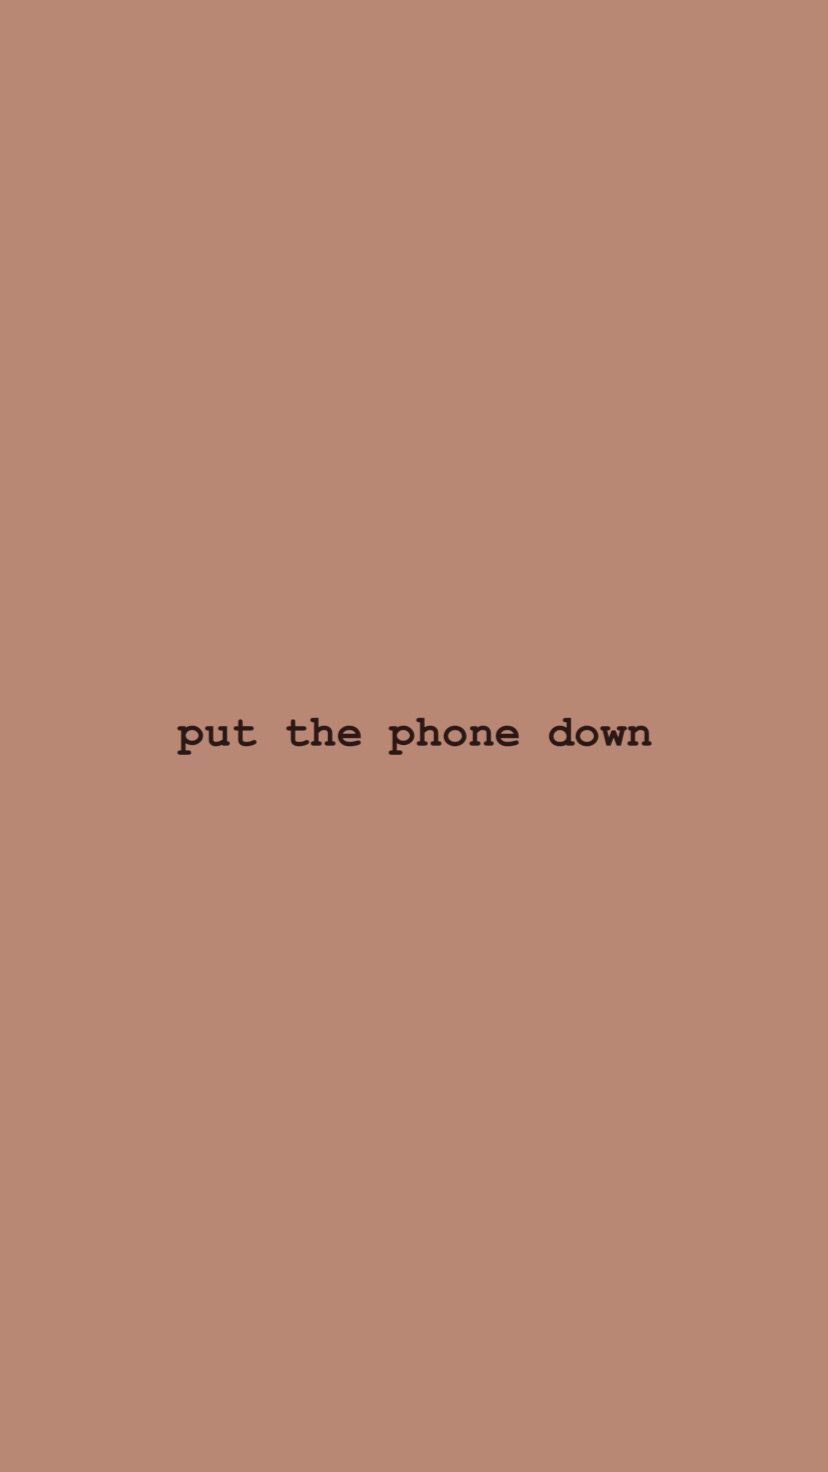 Put the phone down. Dont touch my phone wallpaper, Lock screen wallpaper iphone, iPhone wallpaper quotes funny